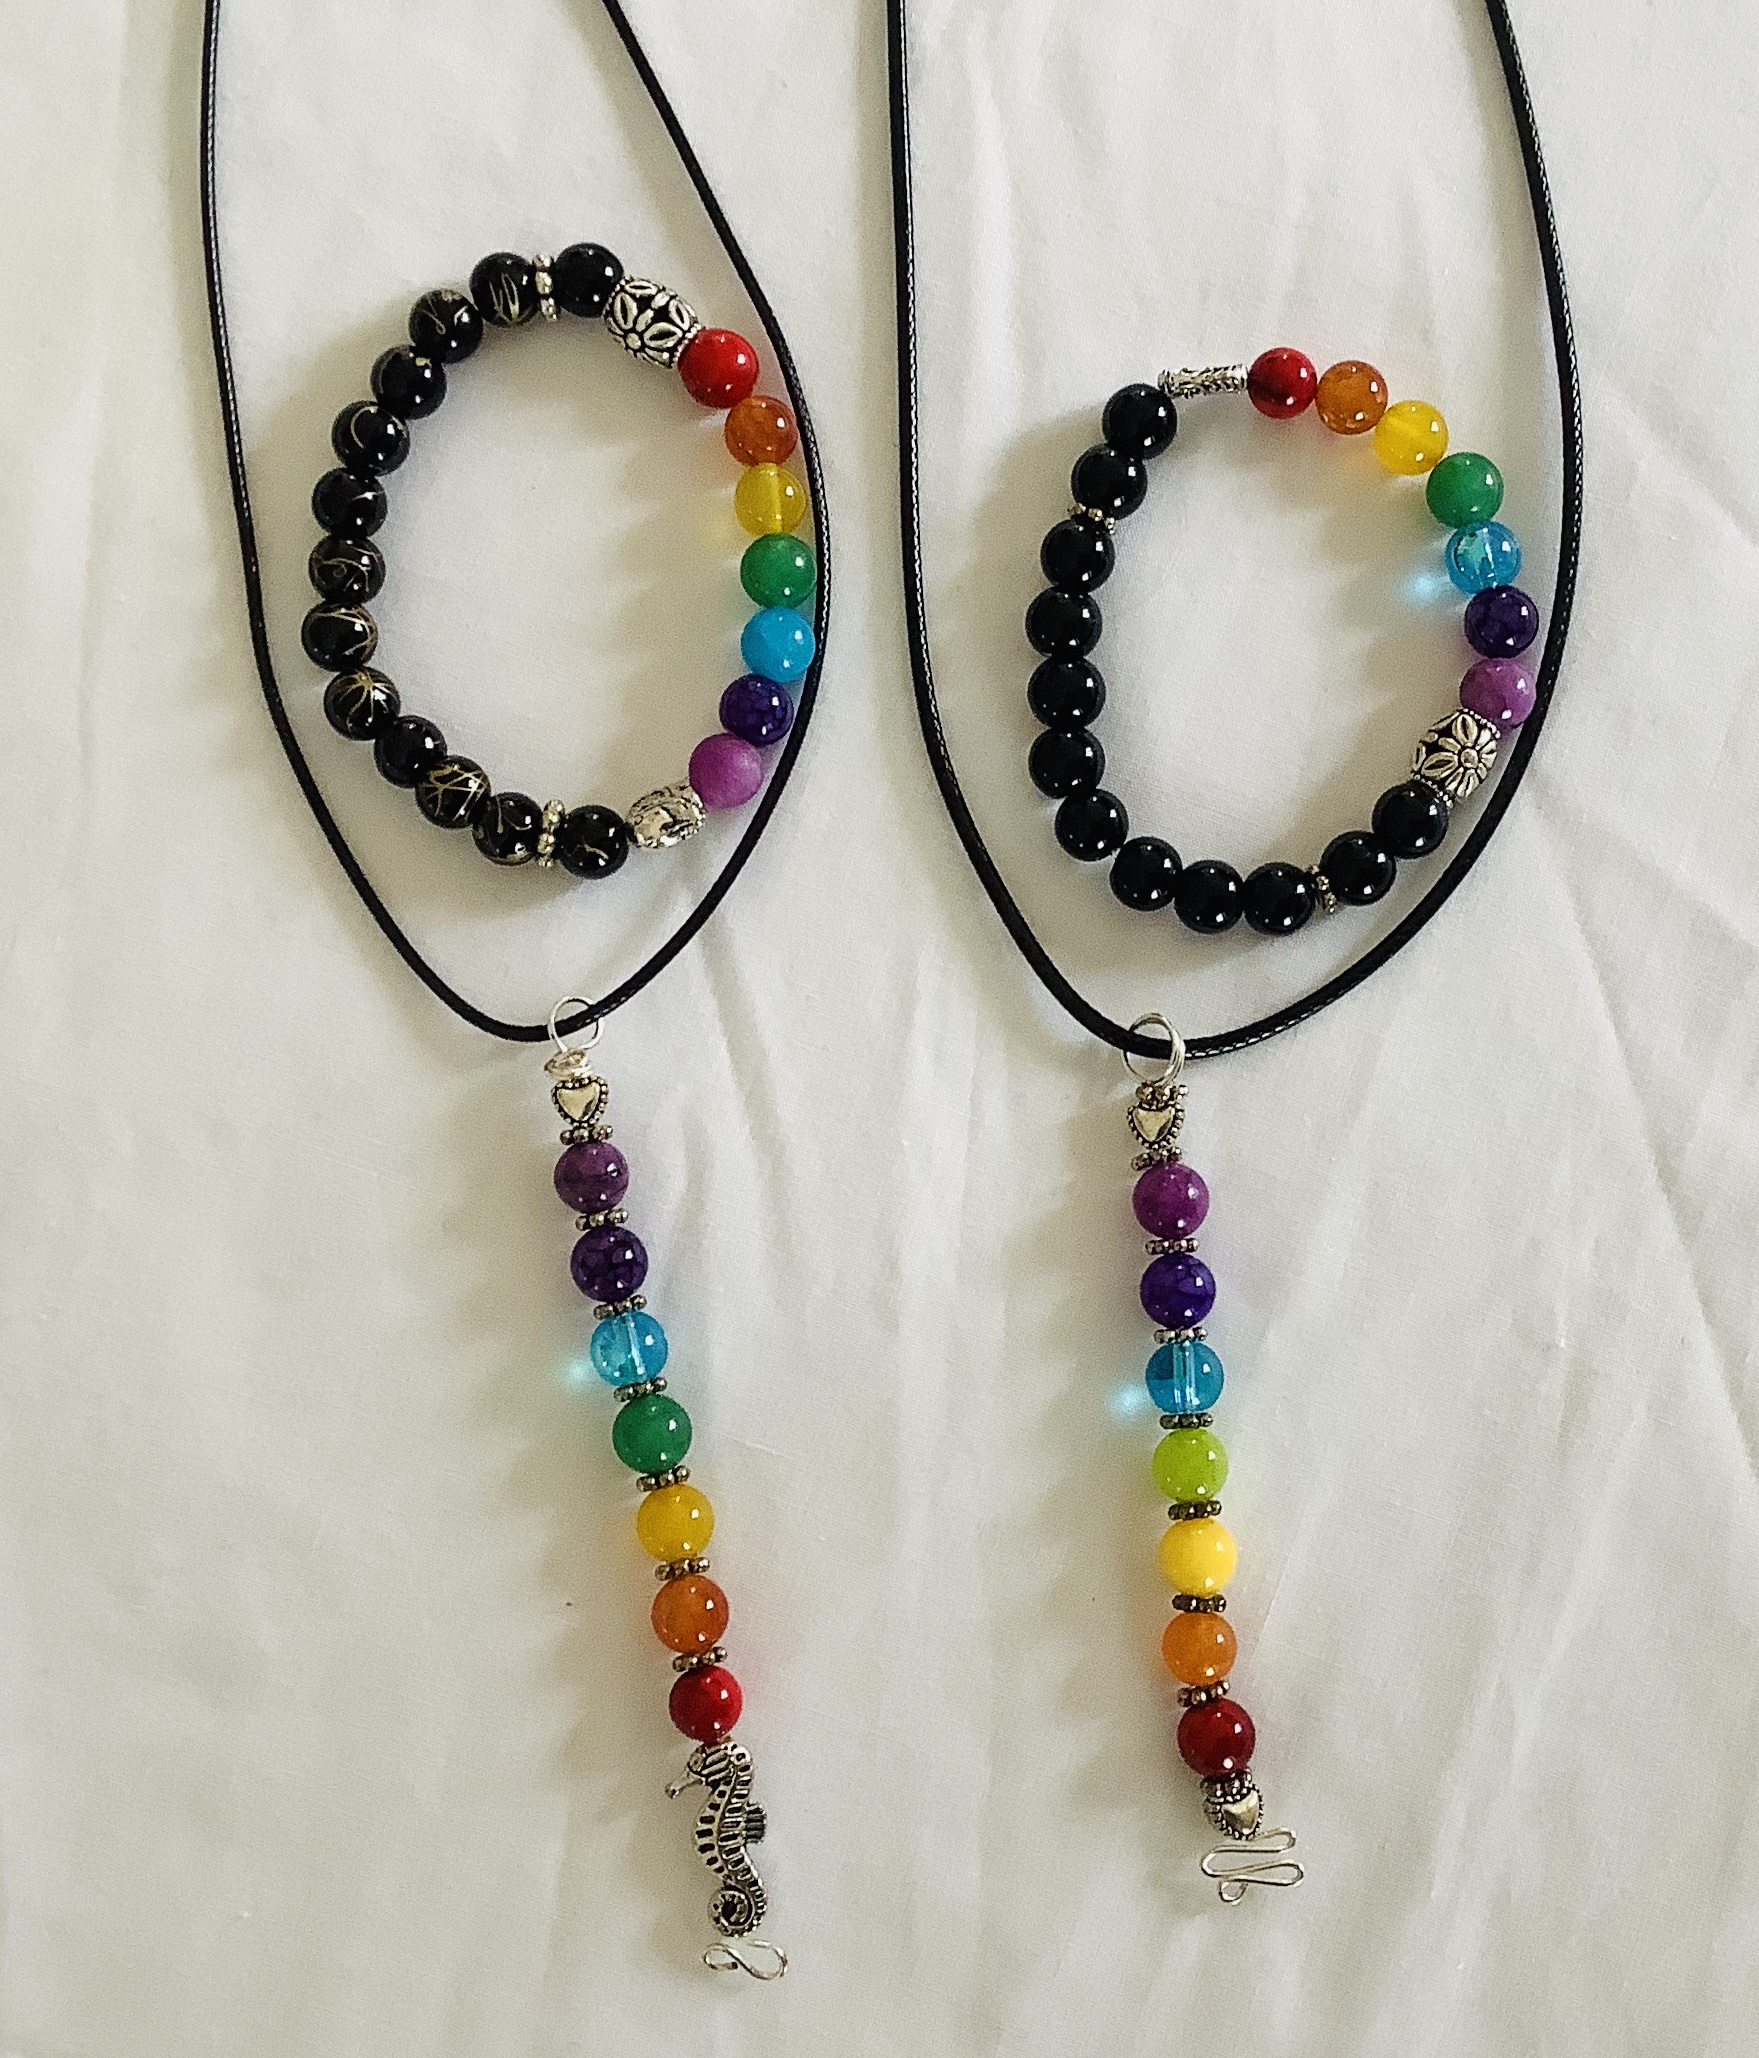 Chakra Pendants and Bracelets. Each piece has the color of each chakra, seven in all, red, orange, yellow, green, blue, purple and light purple.  They are known to be the centers of spiritual power in the human body.  Pendant $20.00 Bracelet $20.00